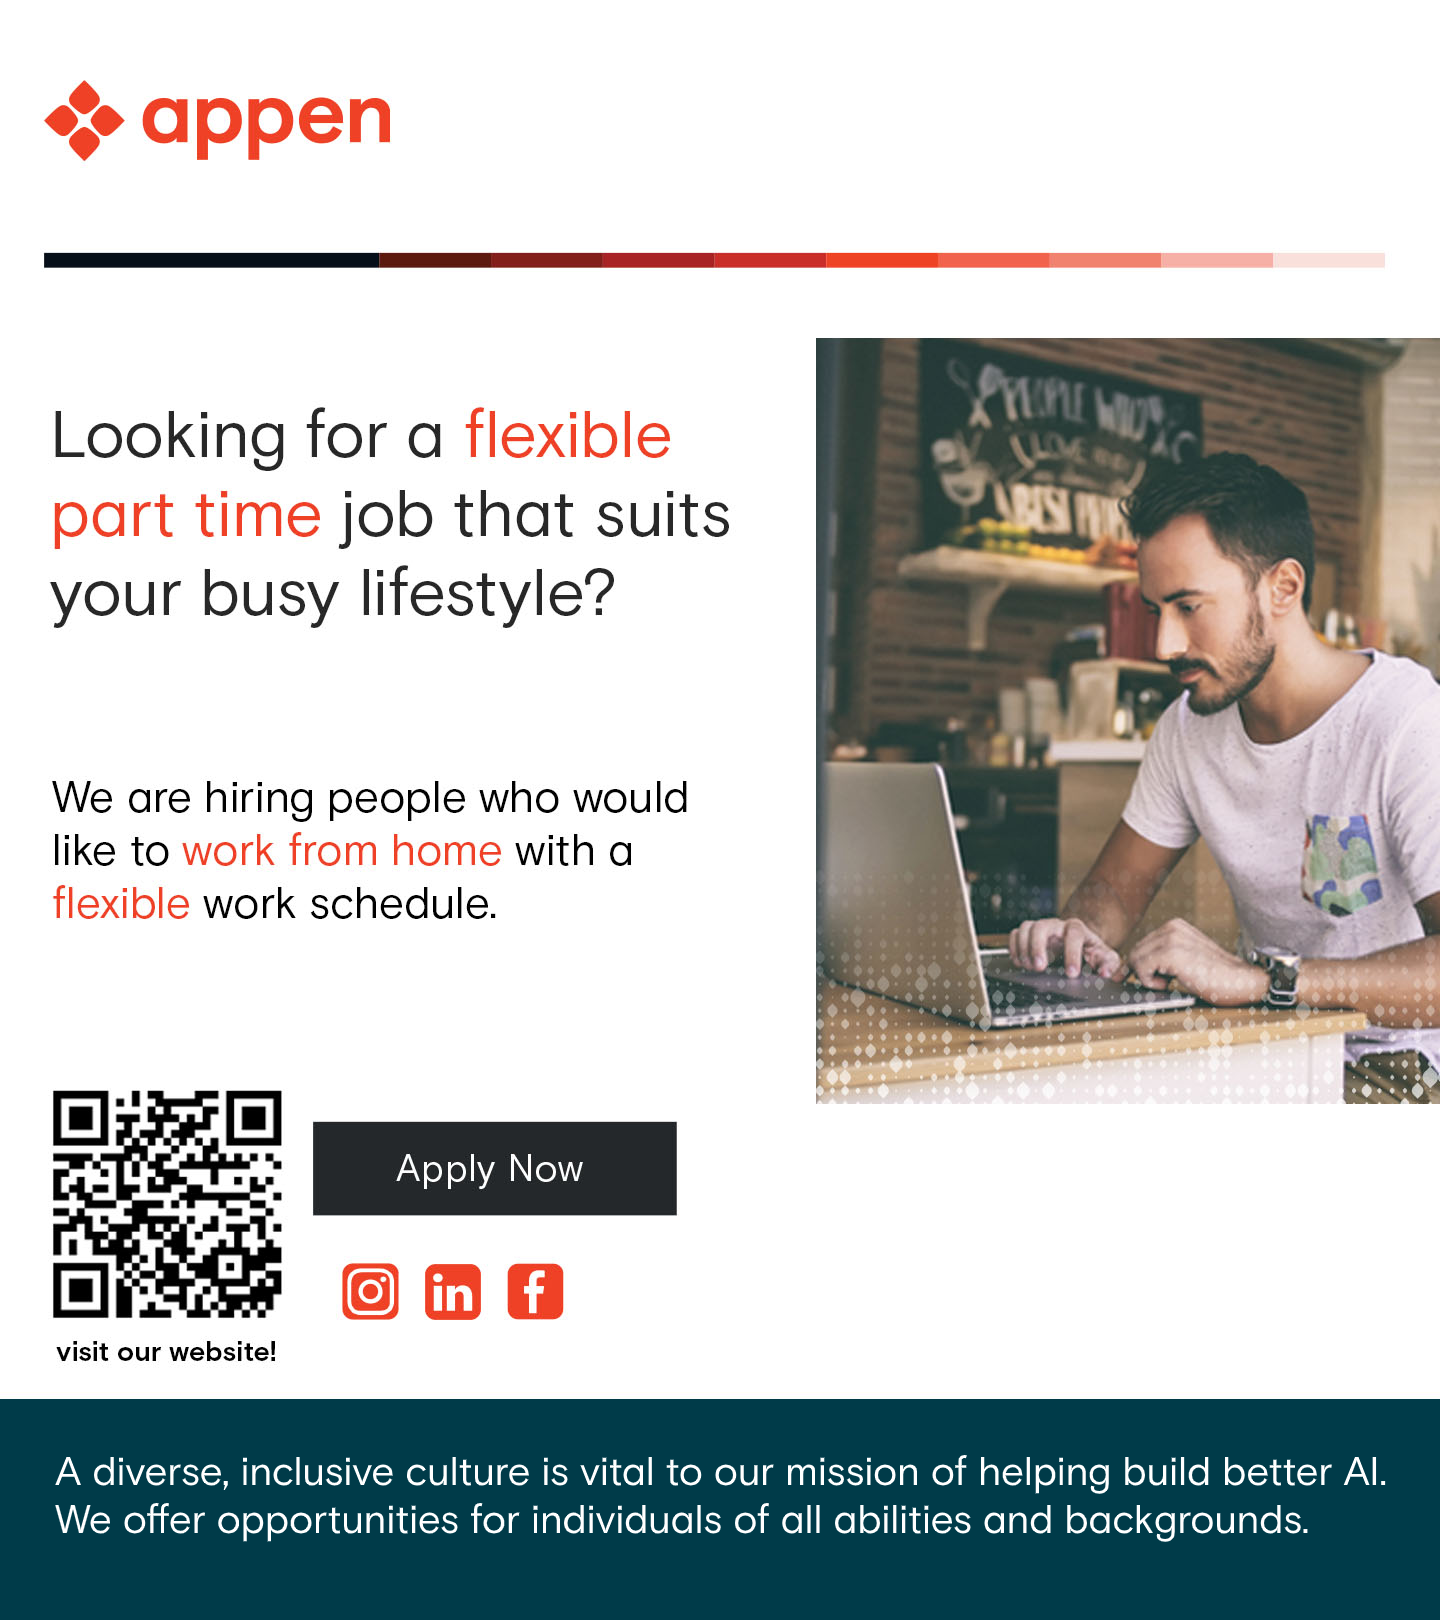 &lt;&gt; appen

 

Looking for a flexible
part time job that suits
your busy lifestyle?

We are hiring people who would
like to work from home with a
flexible work schedule.

 

   

visit our website!

A diverse, inclusive culture is vital to our mission of helping build better Al.

We offer opportunities for individuals of all abilities and backgrounds.